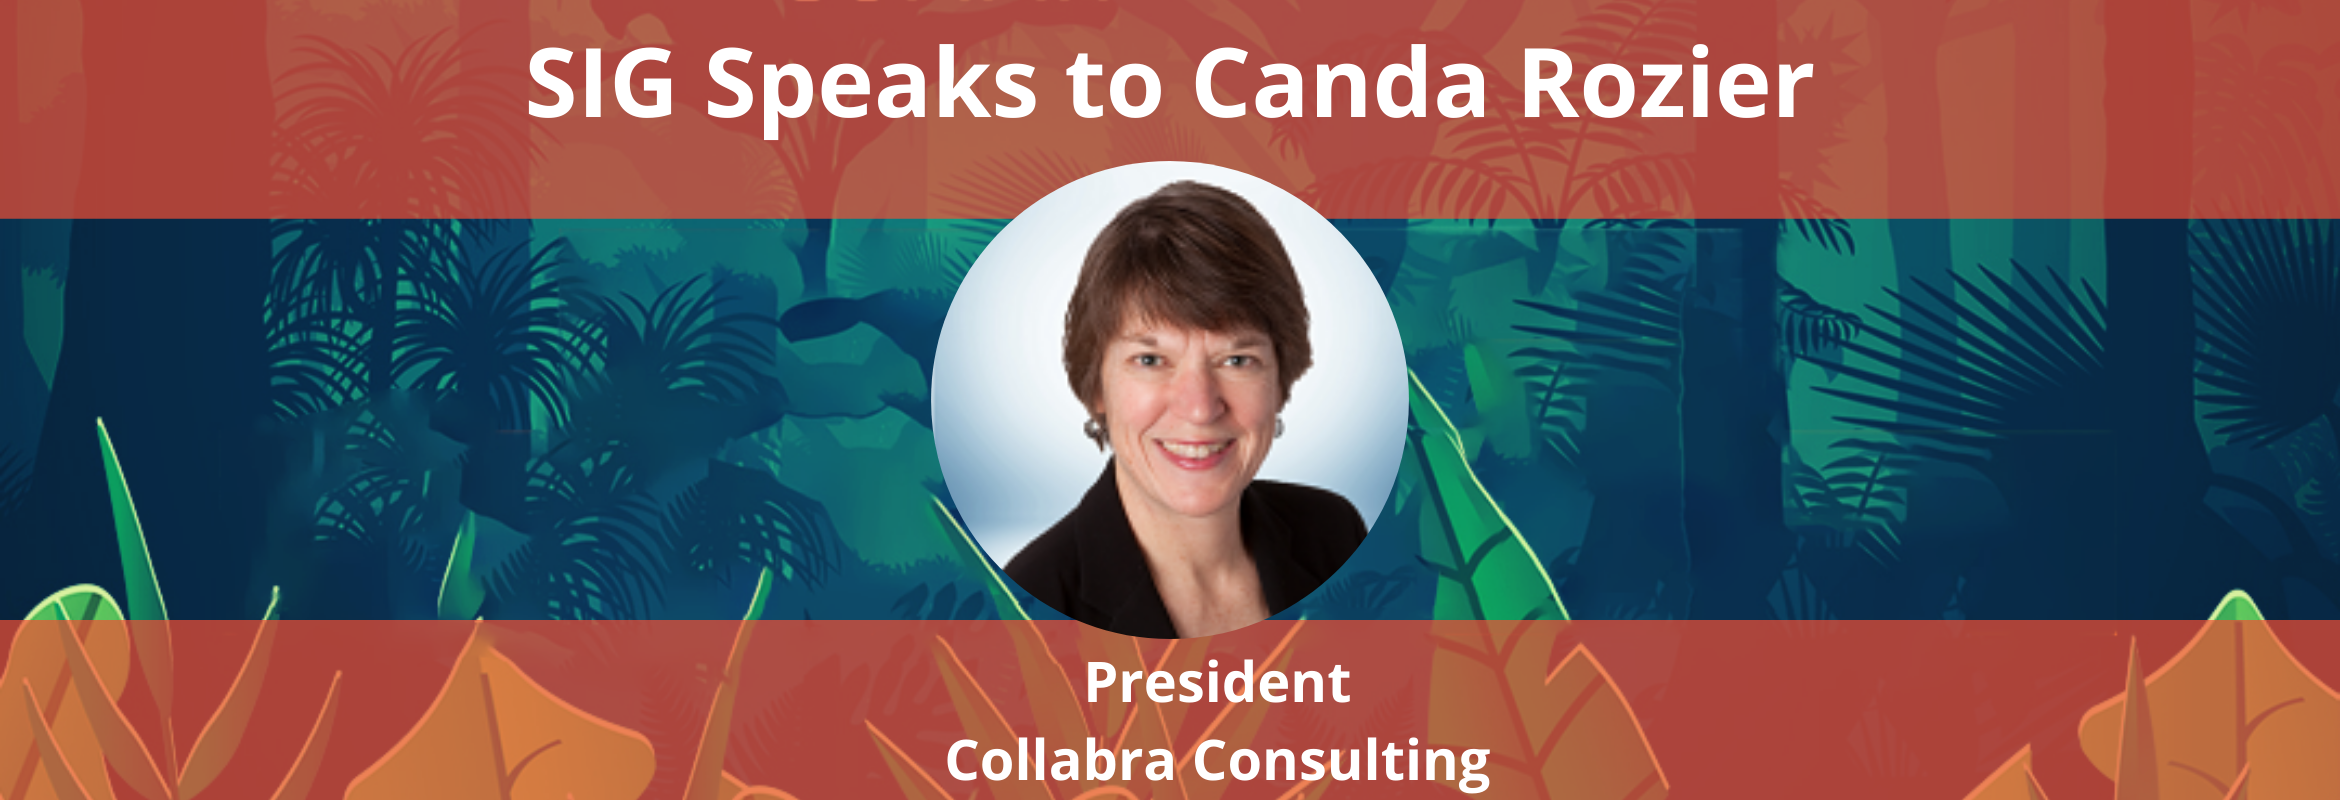 Canda Rozier is the Owner/President at Collabra Consulting